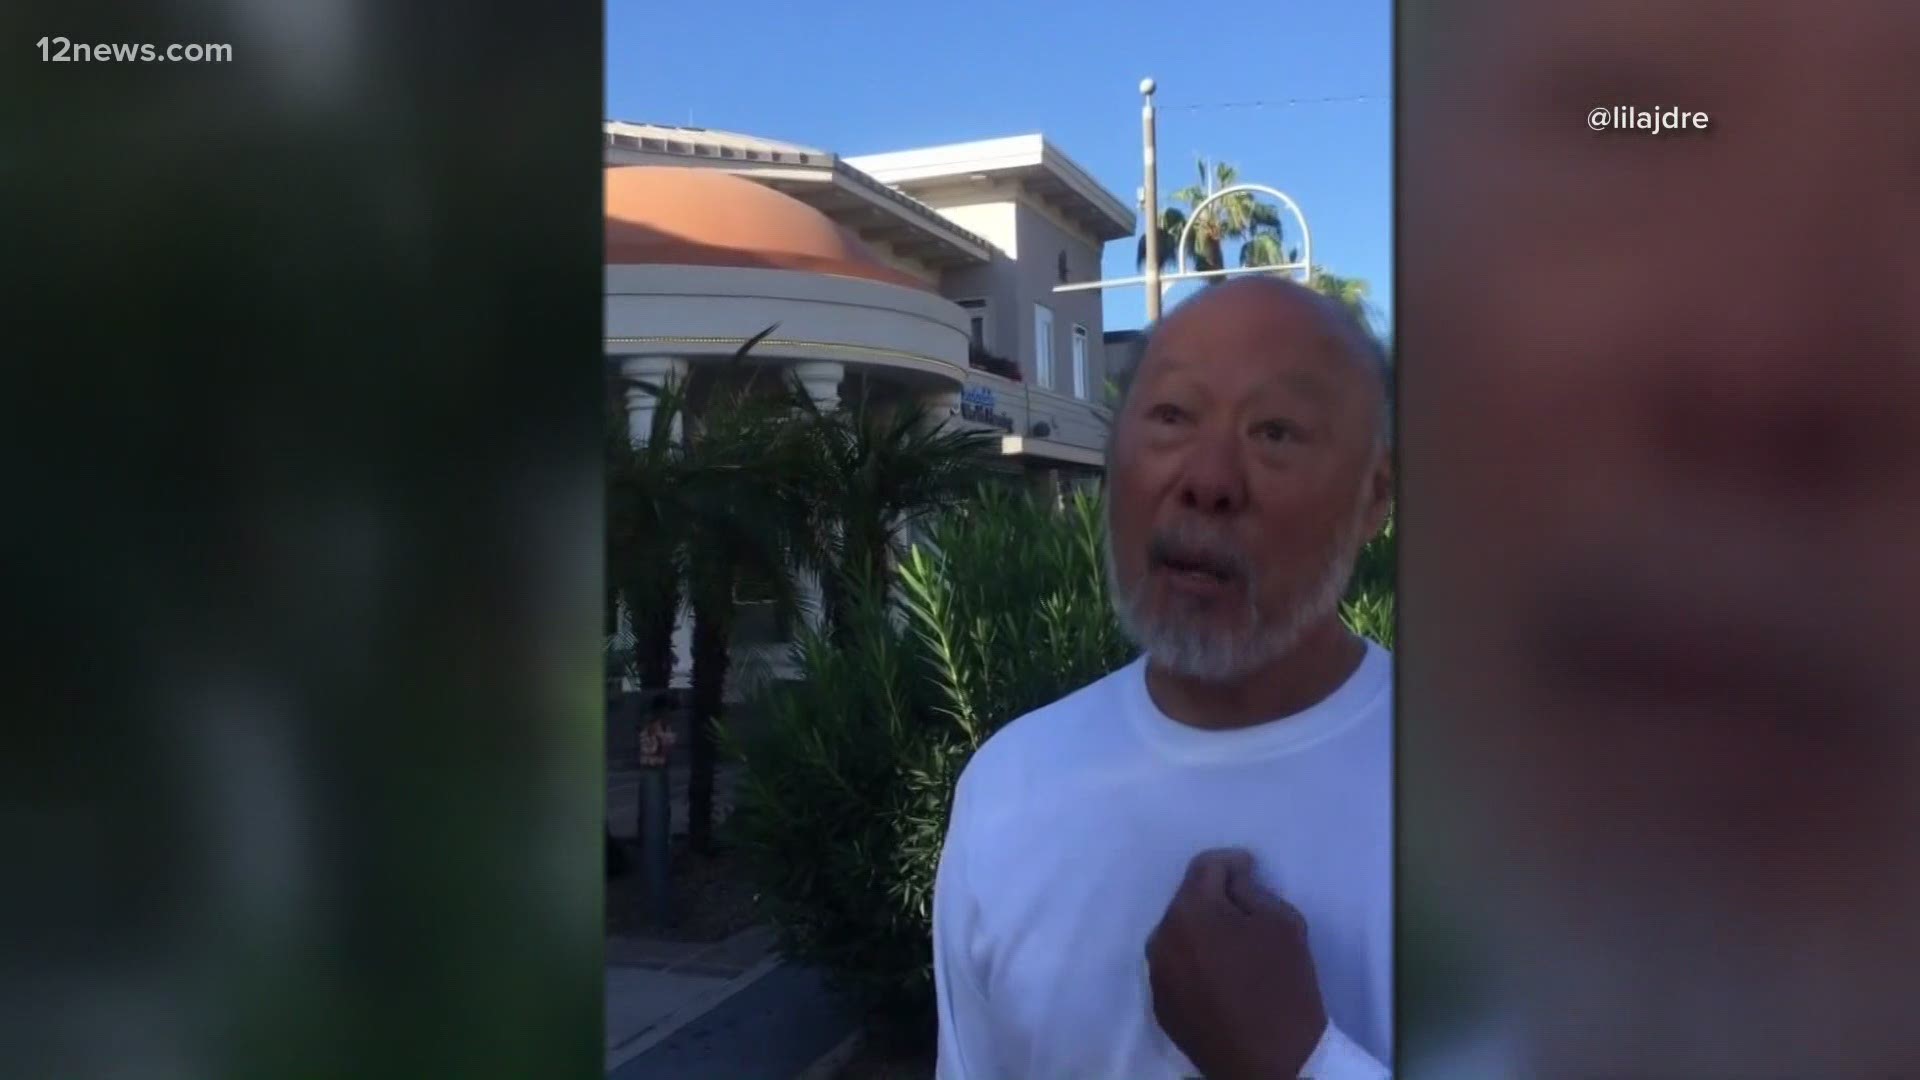 A man was caught on camera confronting two Black men in a racist rant in Old Town Scottsdale. The man is facing a disorderly conduct charge for what happened.